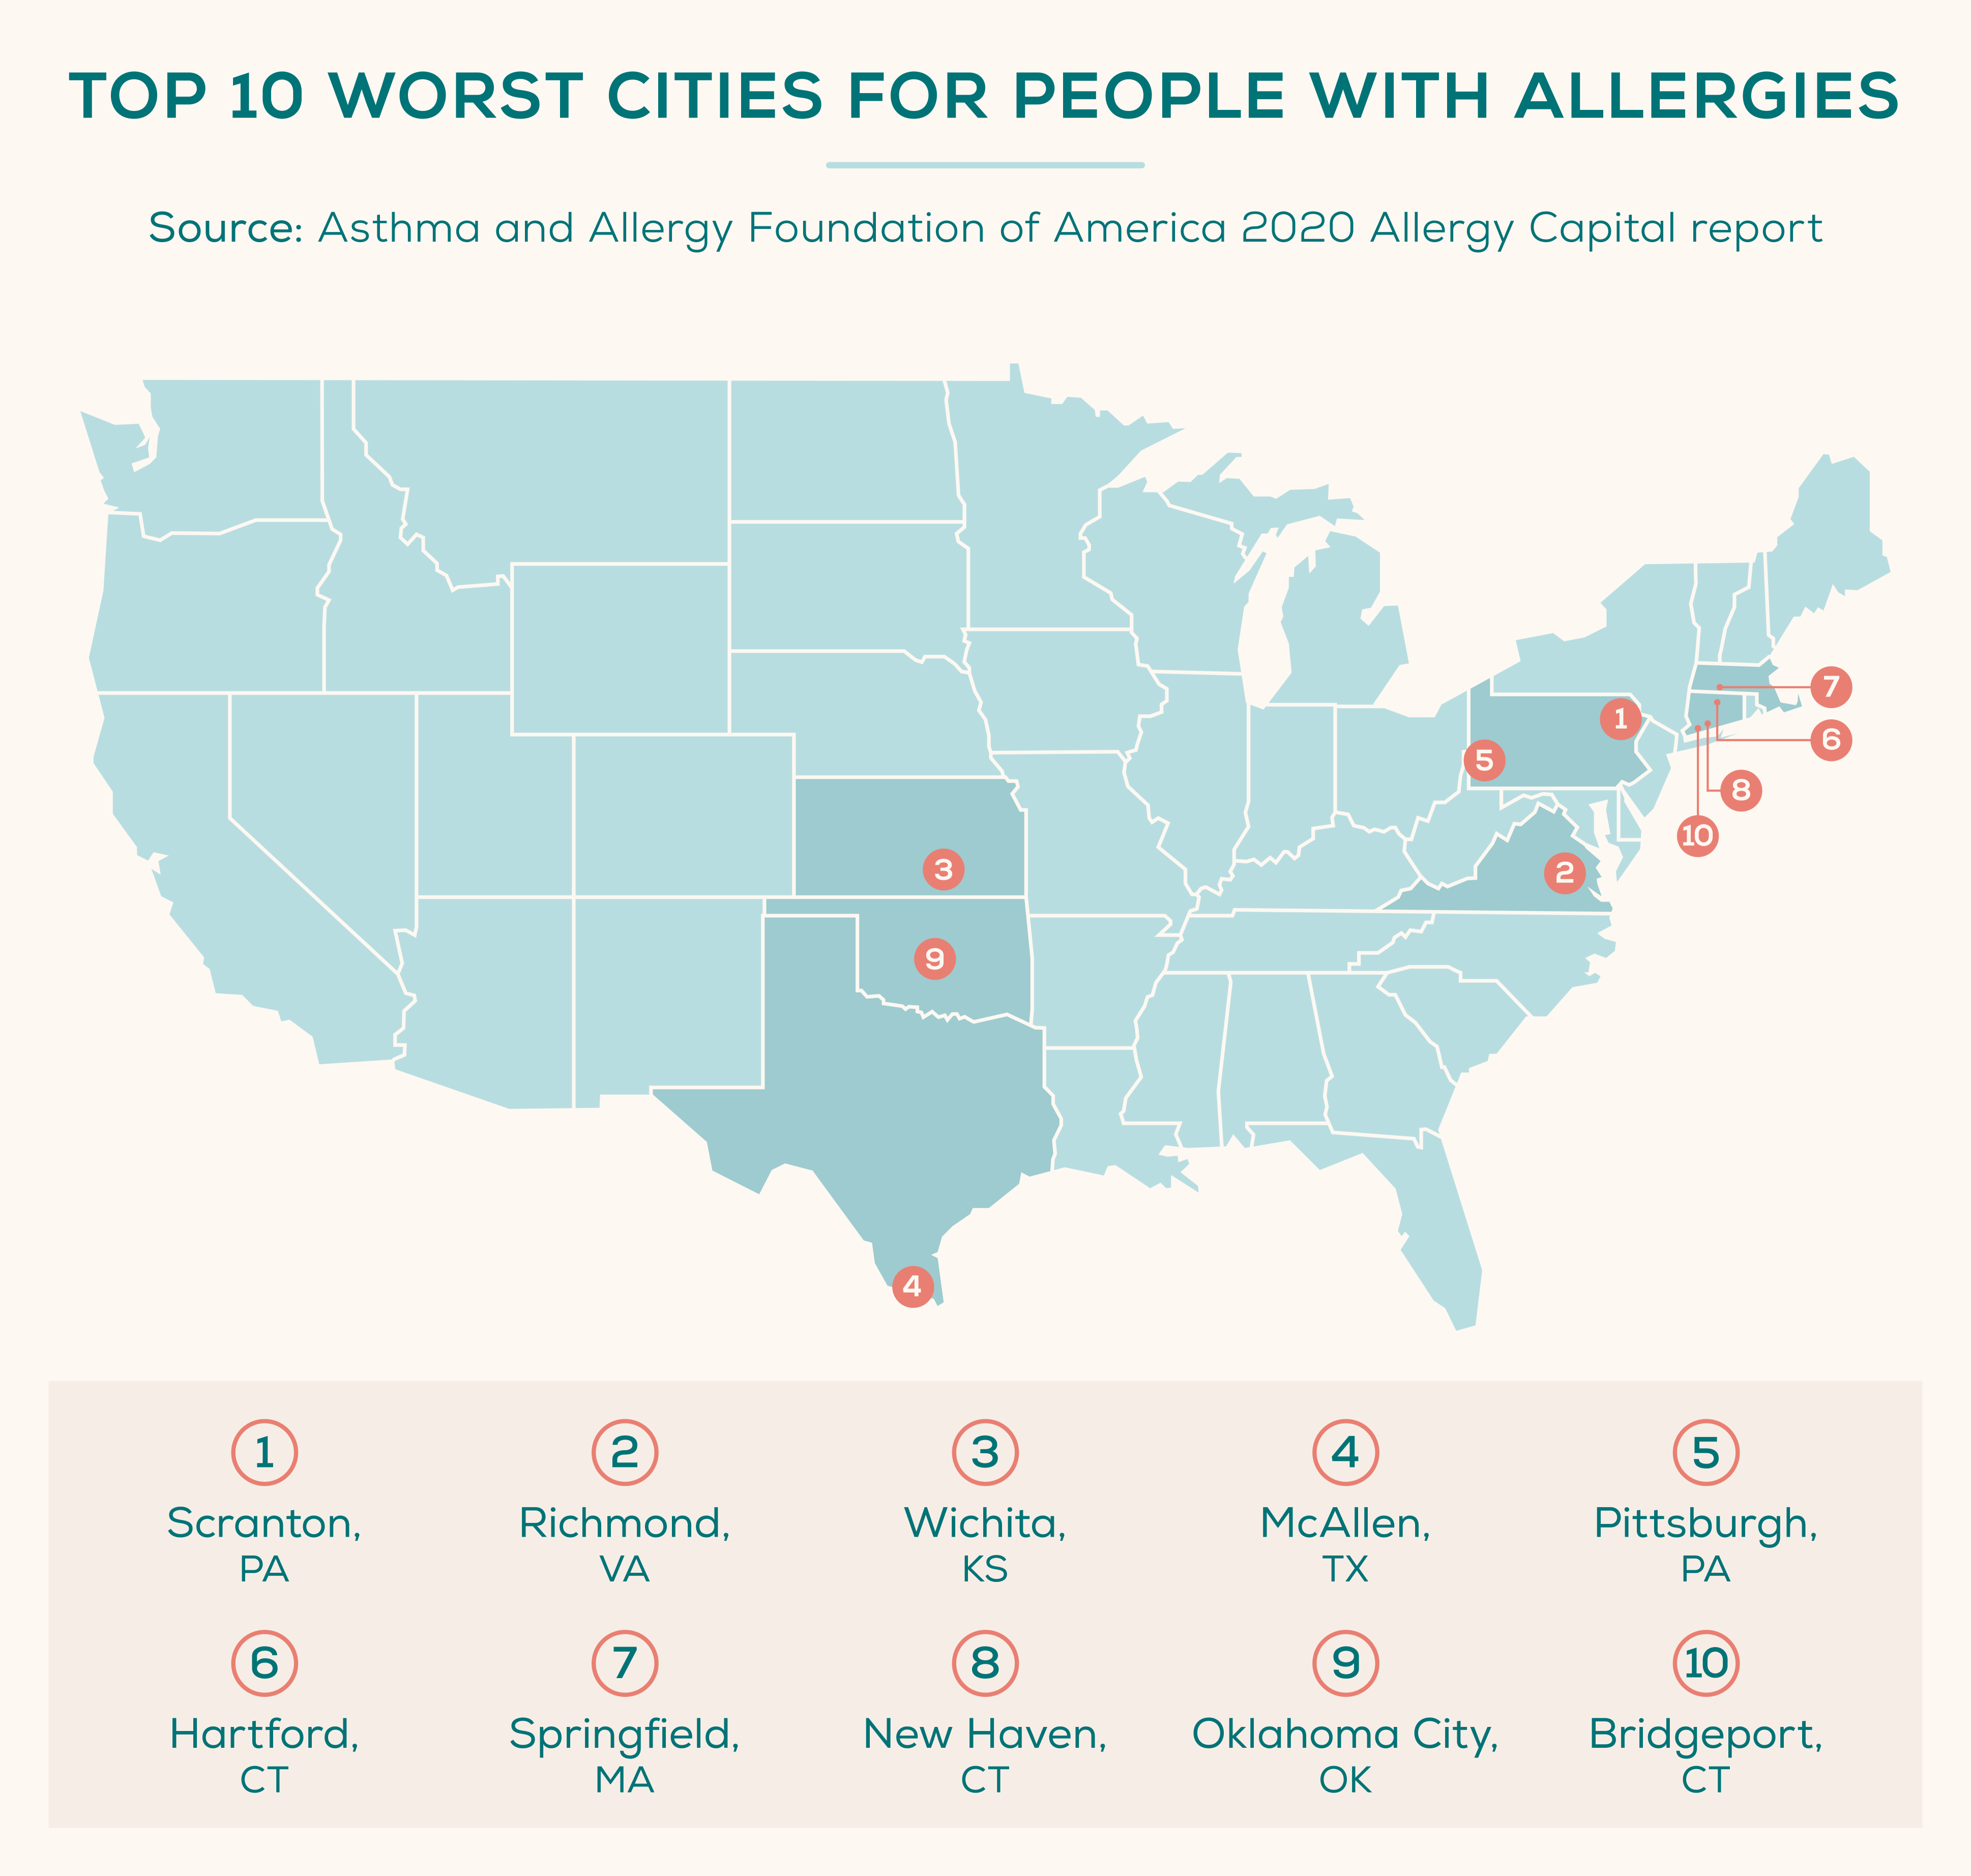 2021 Guide to the Worst Cities for People with Allergies - Blog